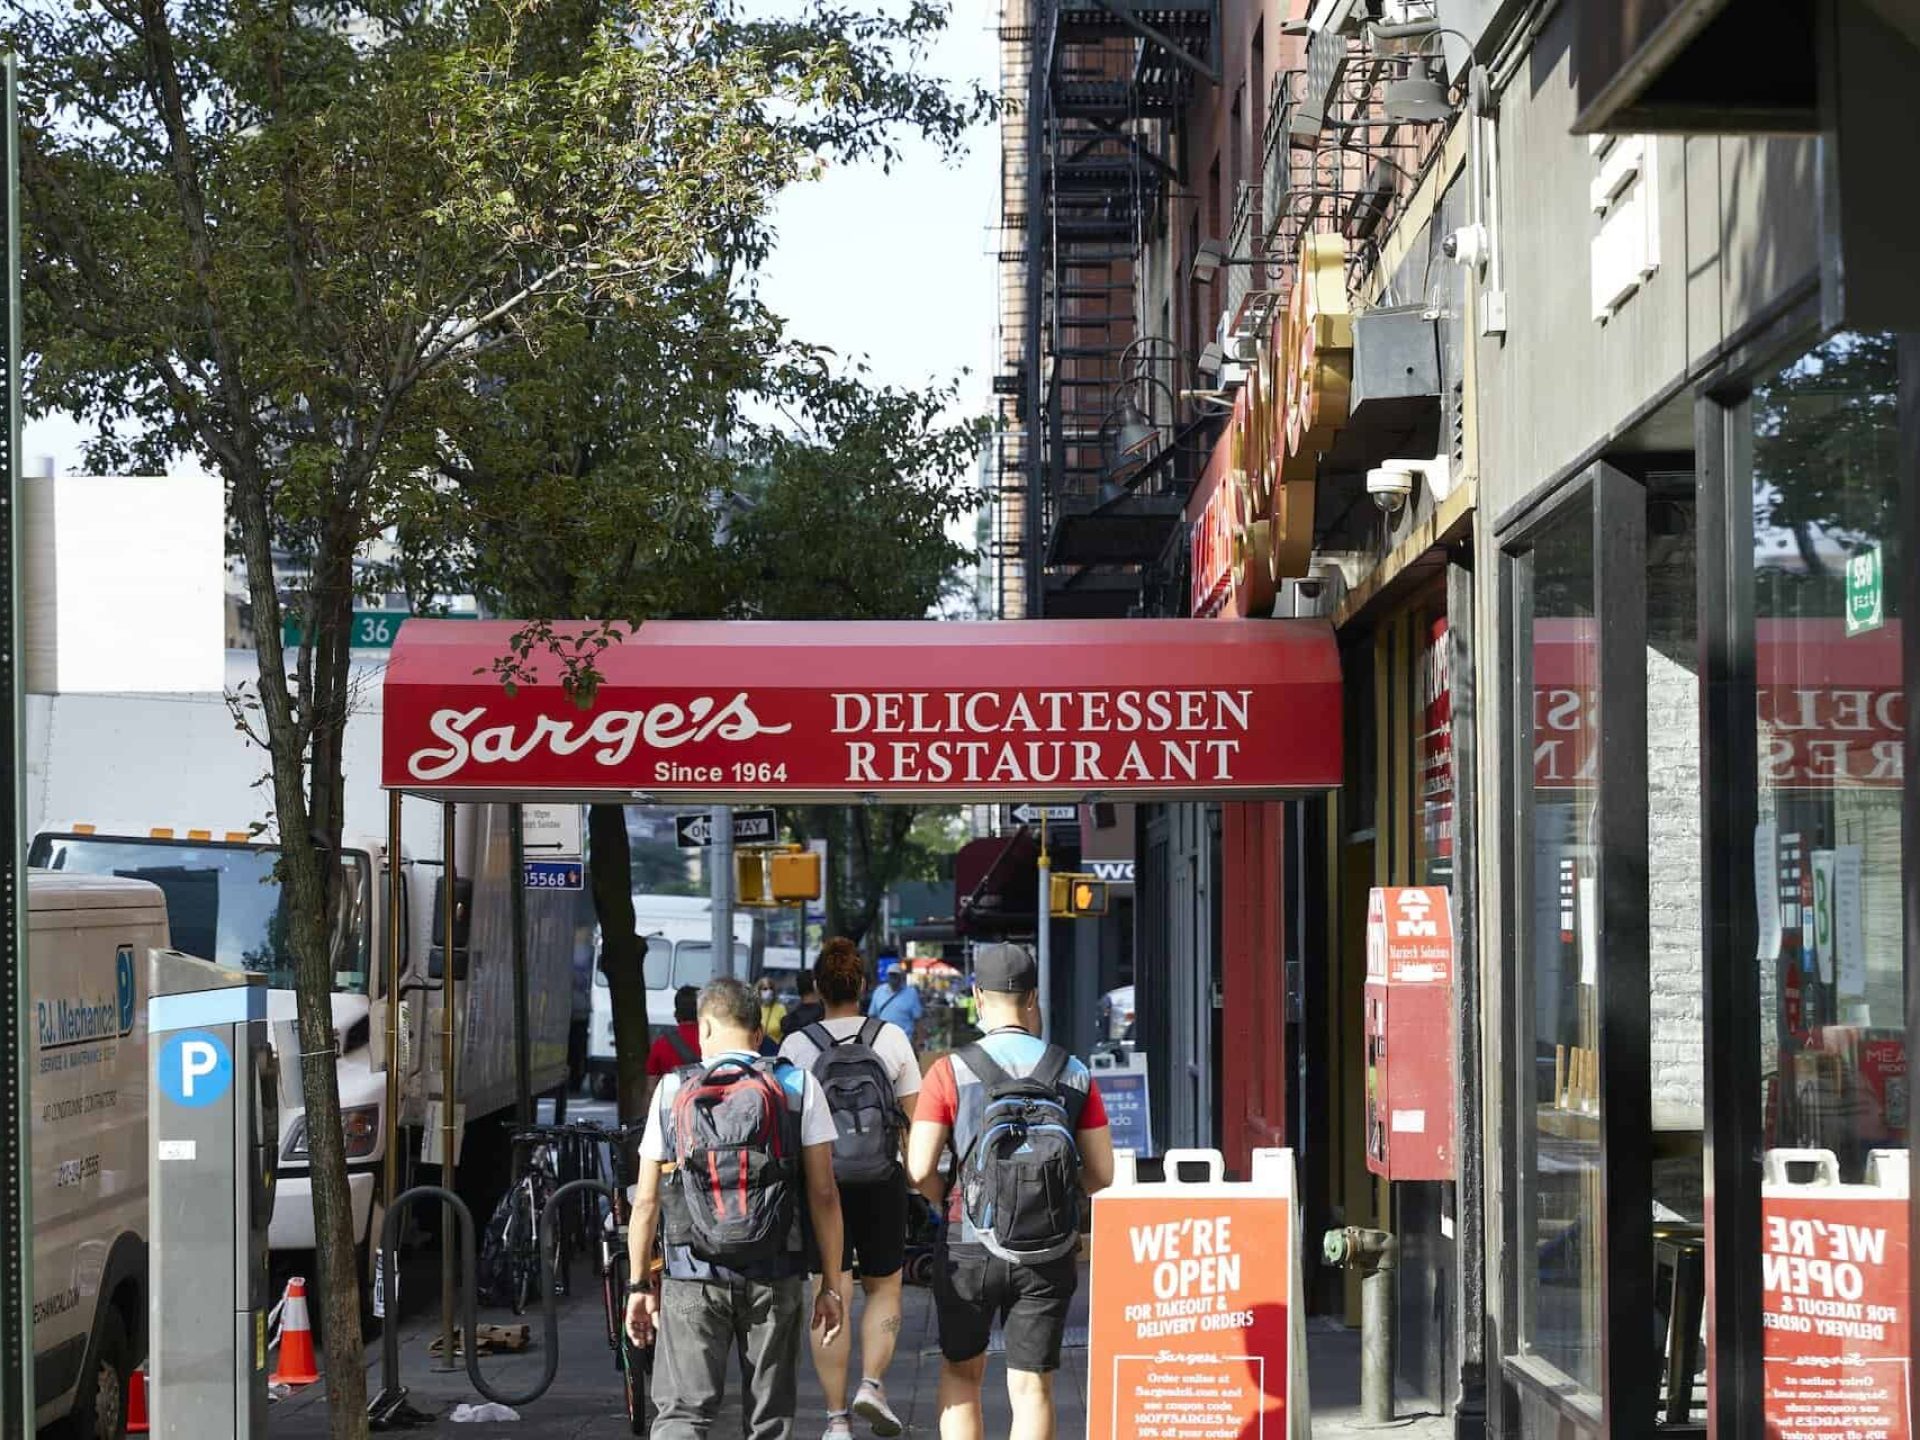 Street view of Sarge's Delicatessen Restaurant with a red awning over the sidewalk with the business name in white letters.